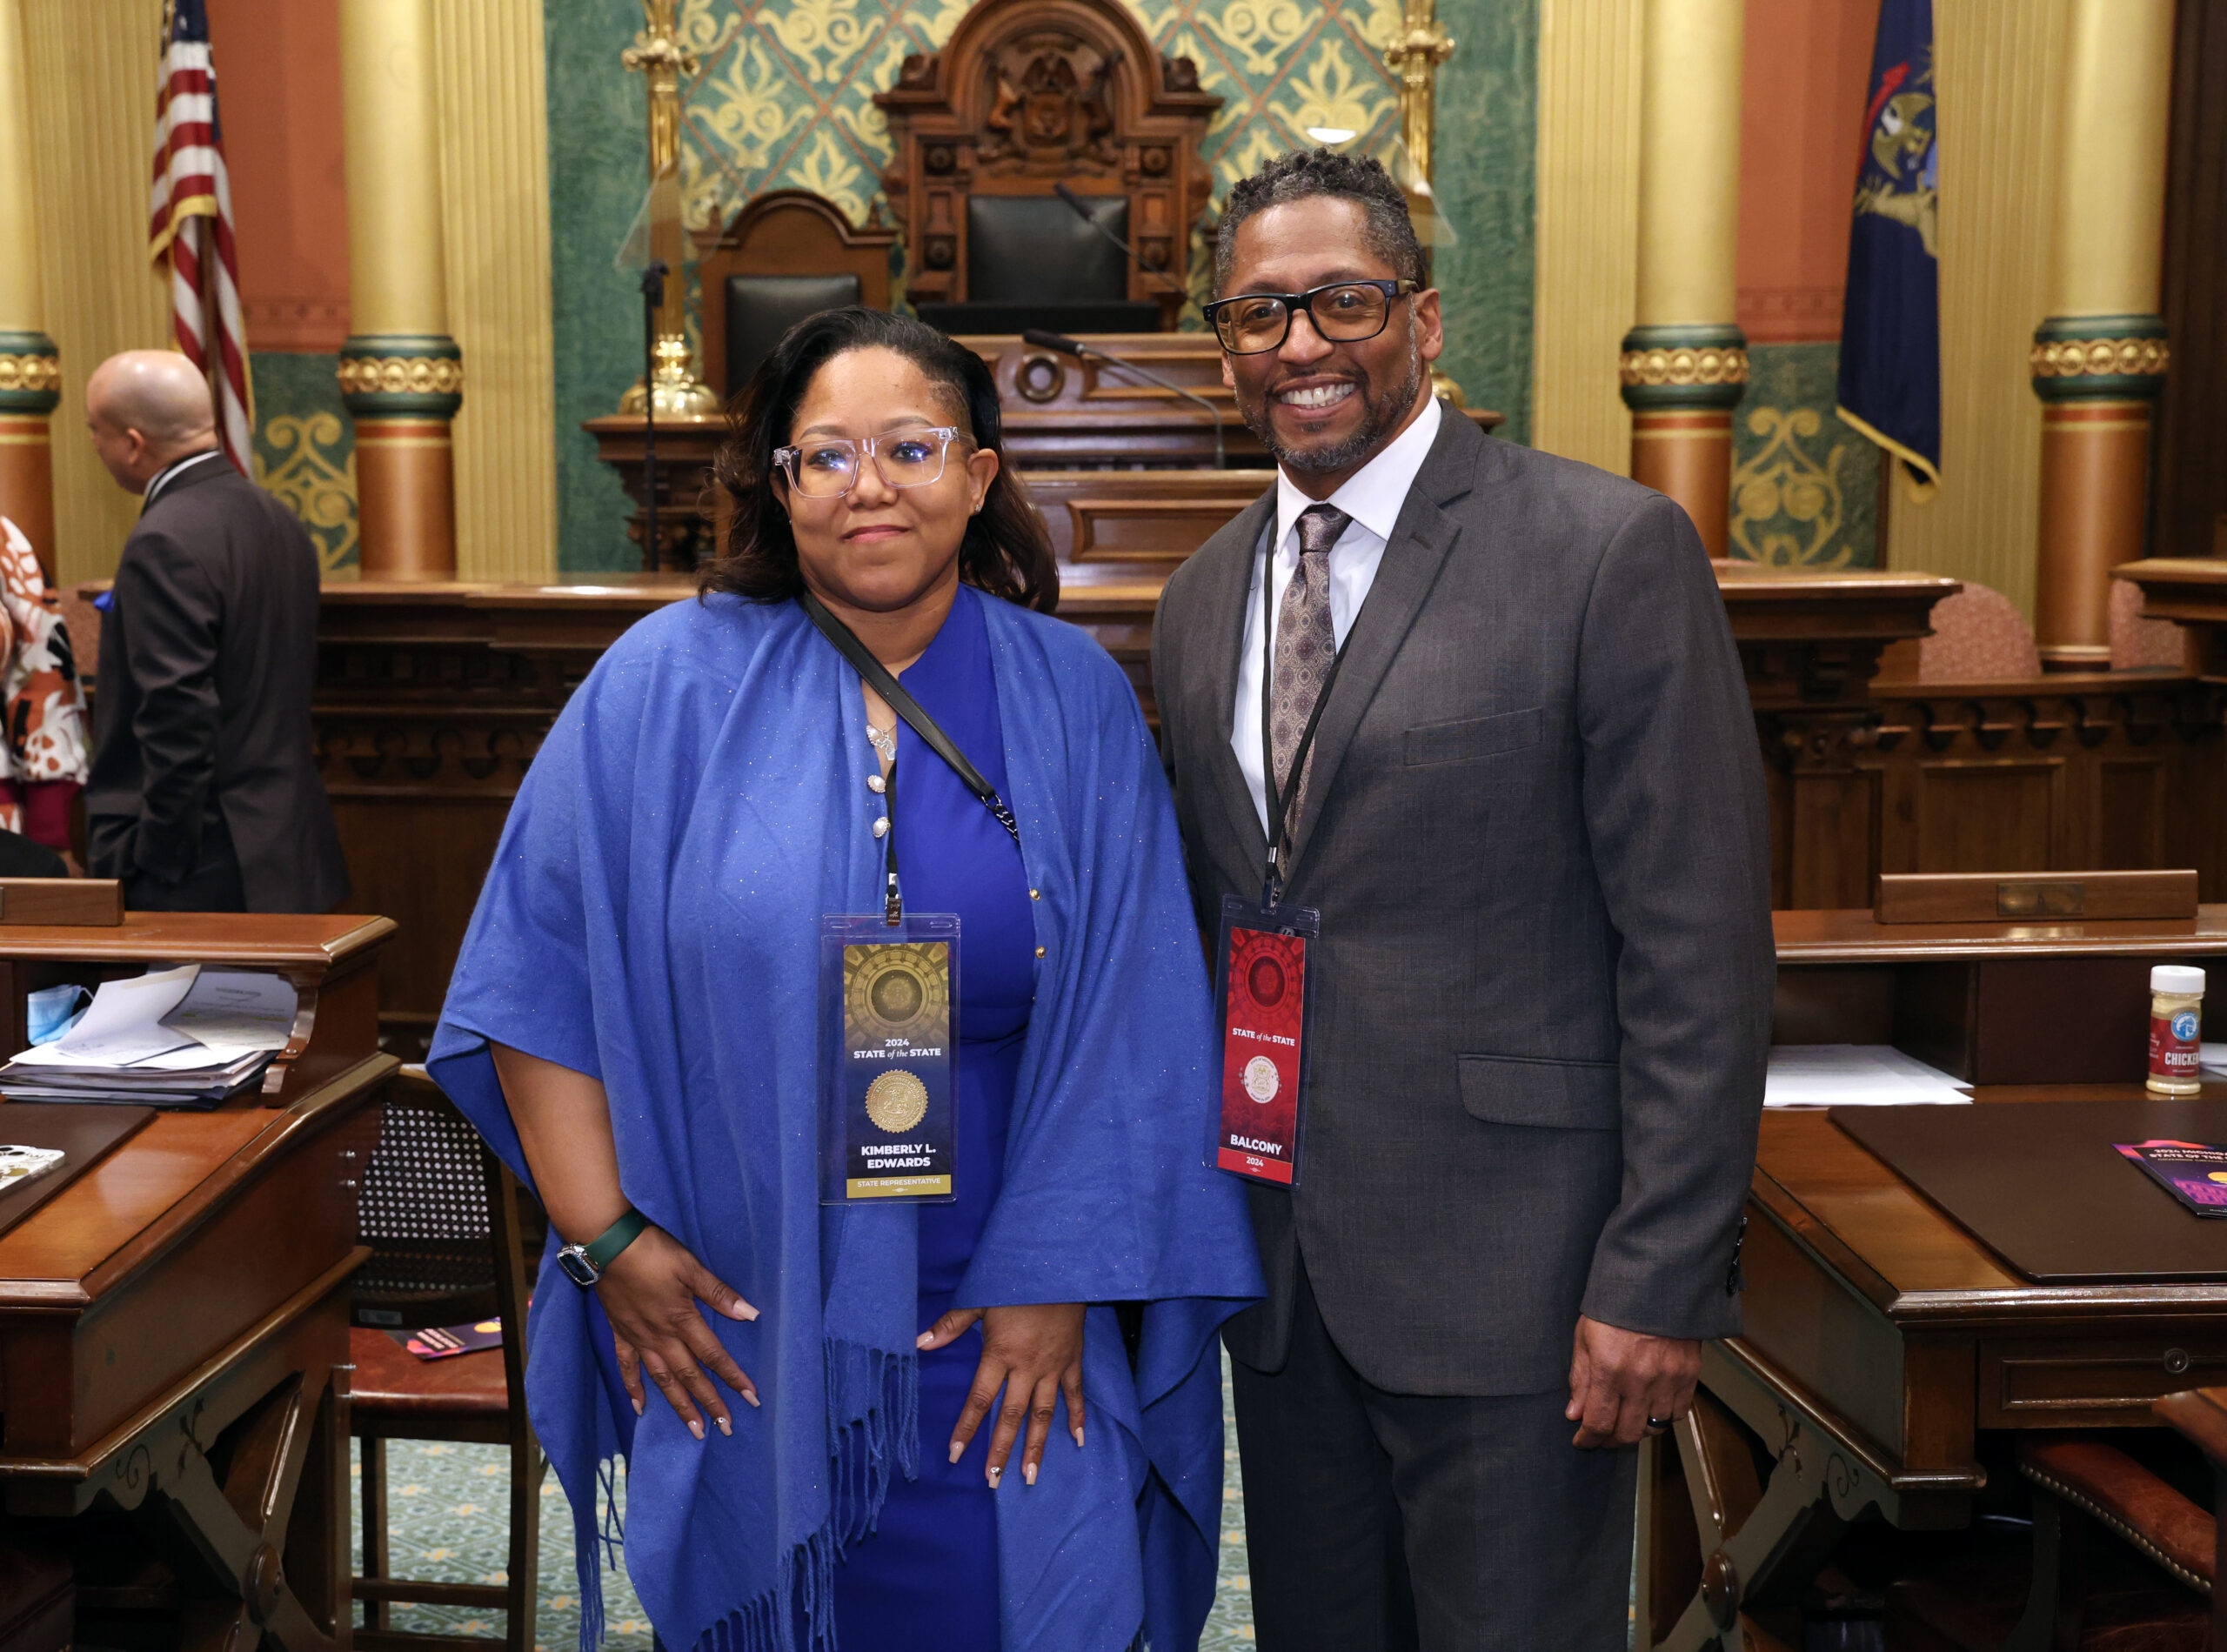 State Rep. Kimberly Edwards stands with Pastor Kevin Lawrence on the Michigan House floor.